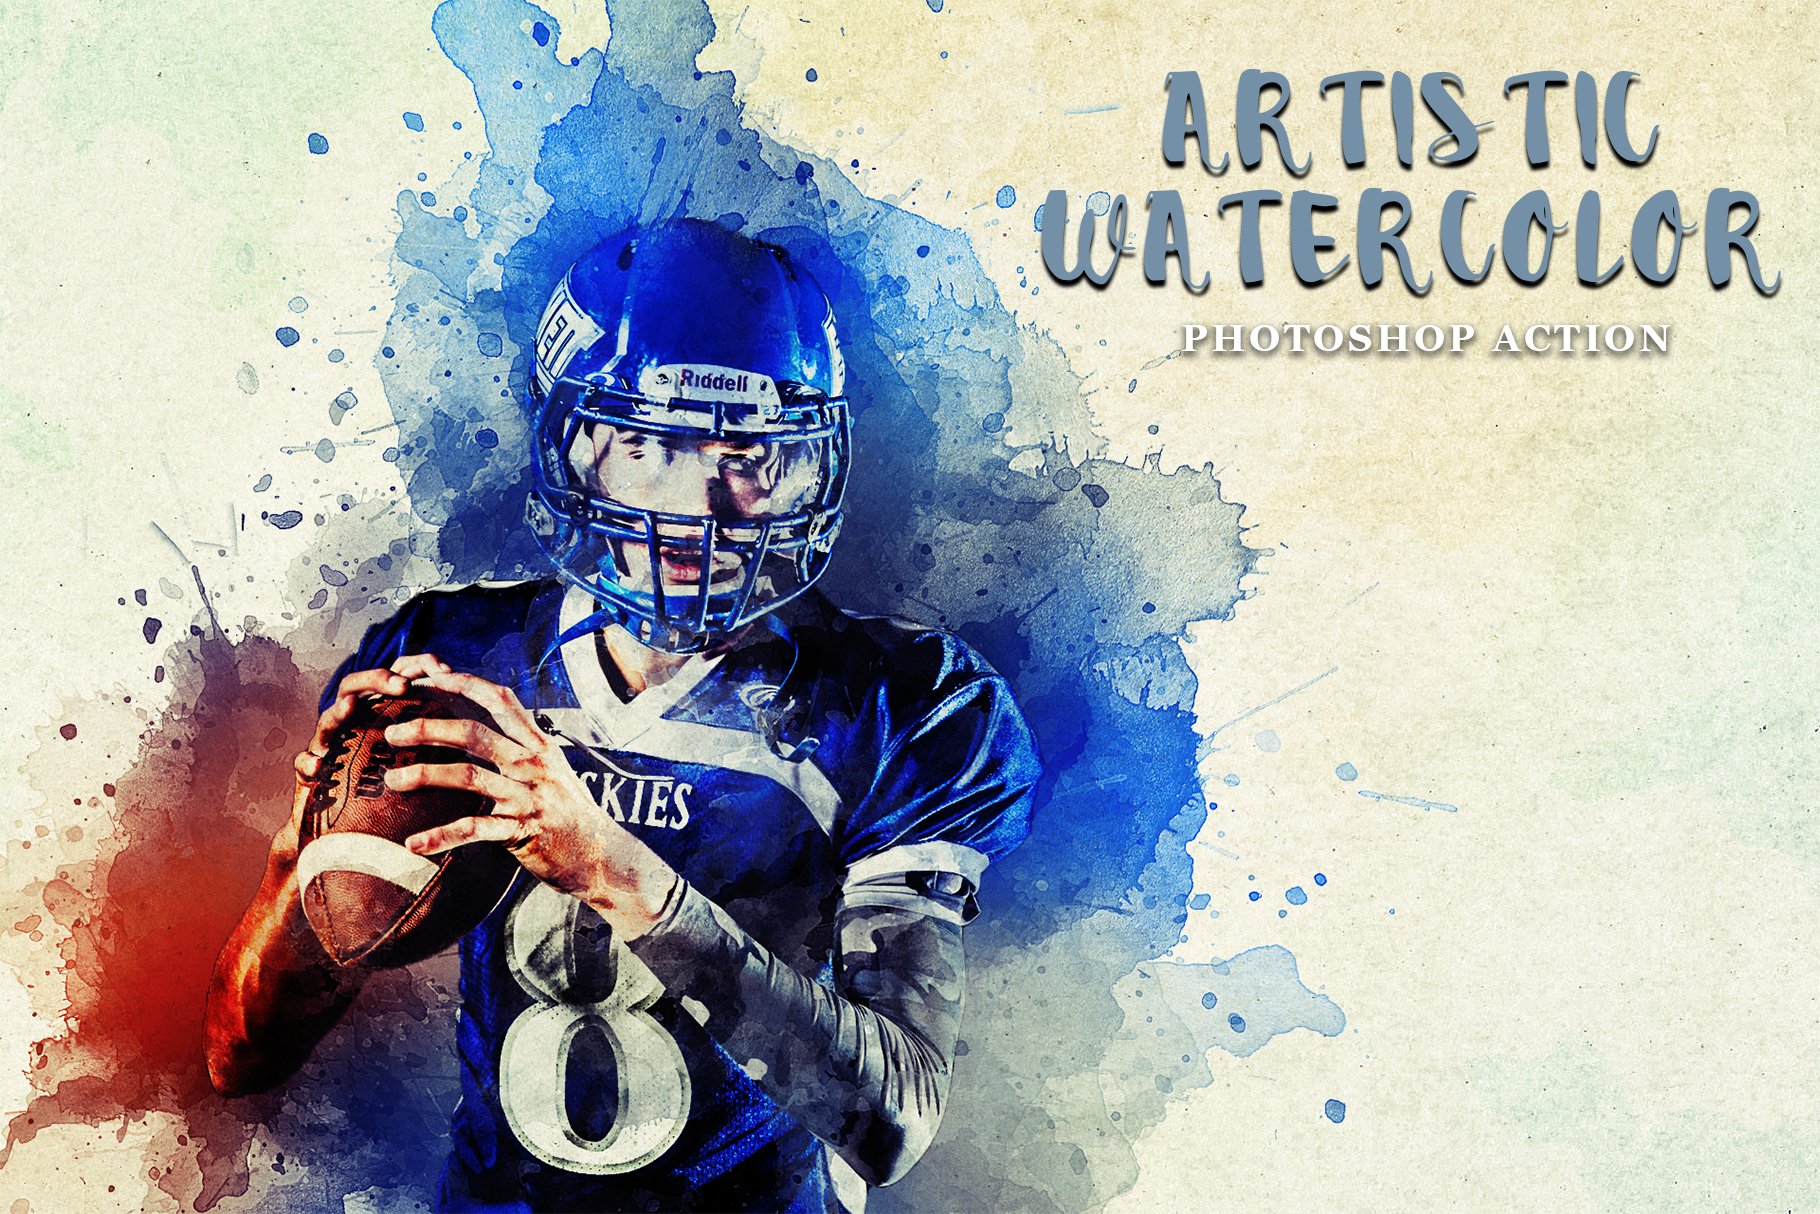 Artistic Watercolor Photoshop actioncover image.